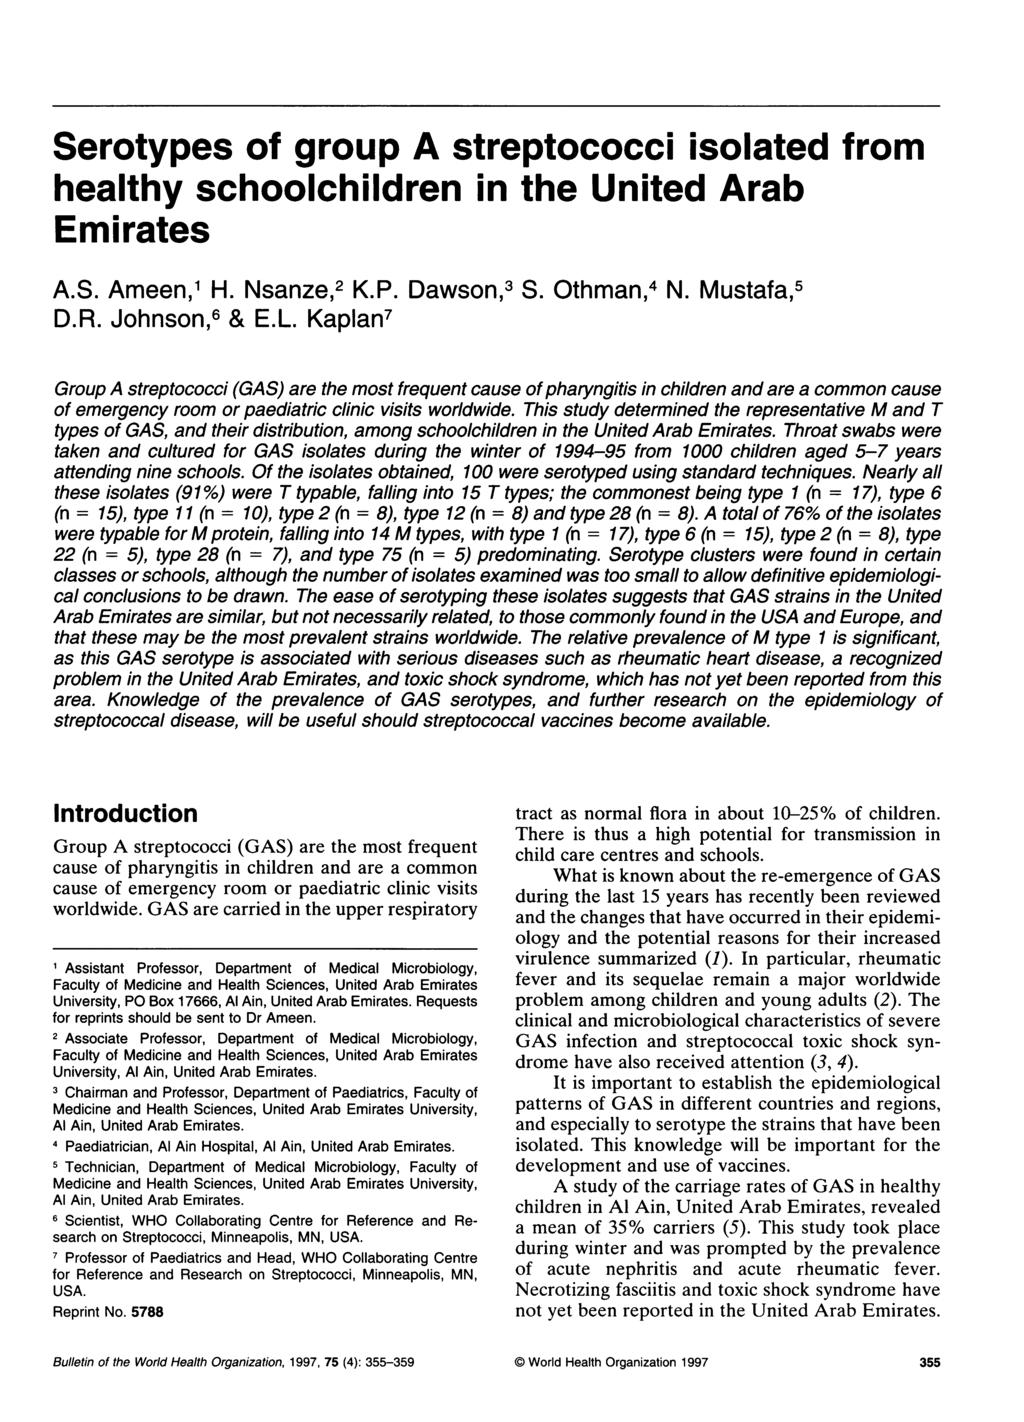 Serotypes of group A streptococci isolated from healthy schoolchildren in the United Arab Emirates A.S. Ameen,1 H. Nsanze,2 K.P. Dawson,3 S. Othman,4 N. Mustafa,5 D.R. Johnson,6 & E.L.